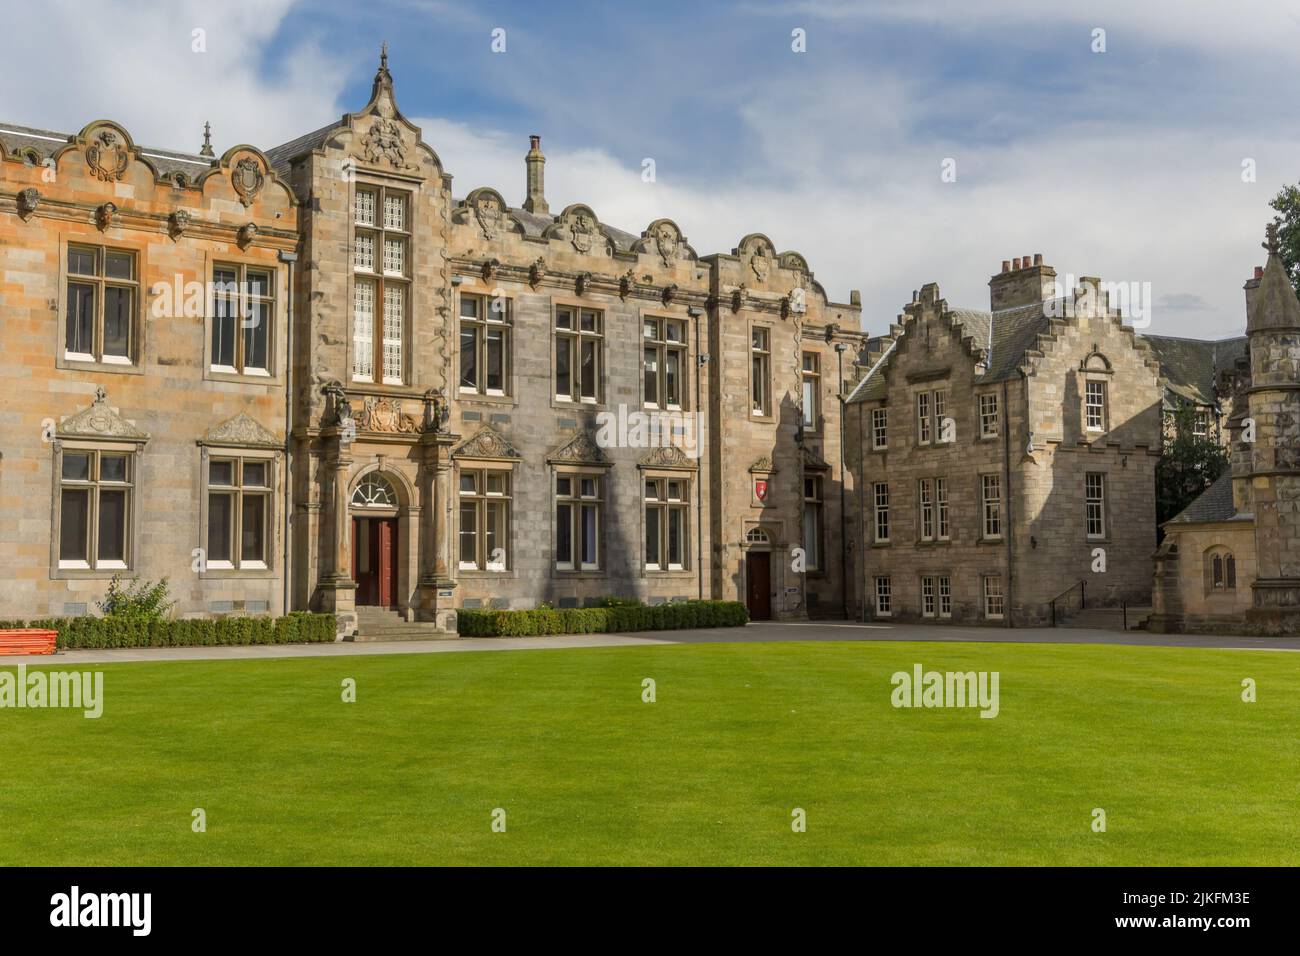 The main building of the University of St Andrews, Scotland, Great Britain - old British architecture Stock Photo